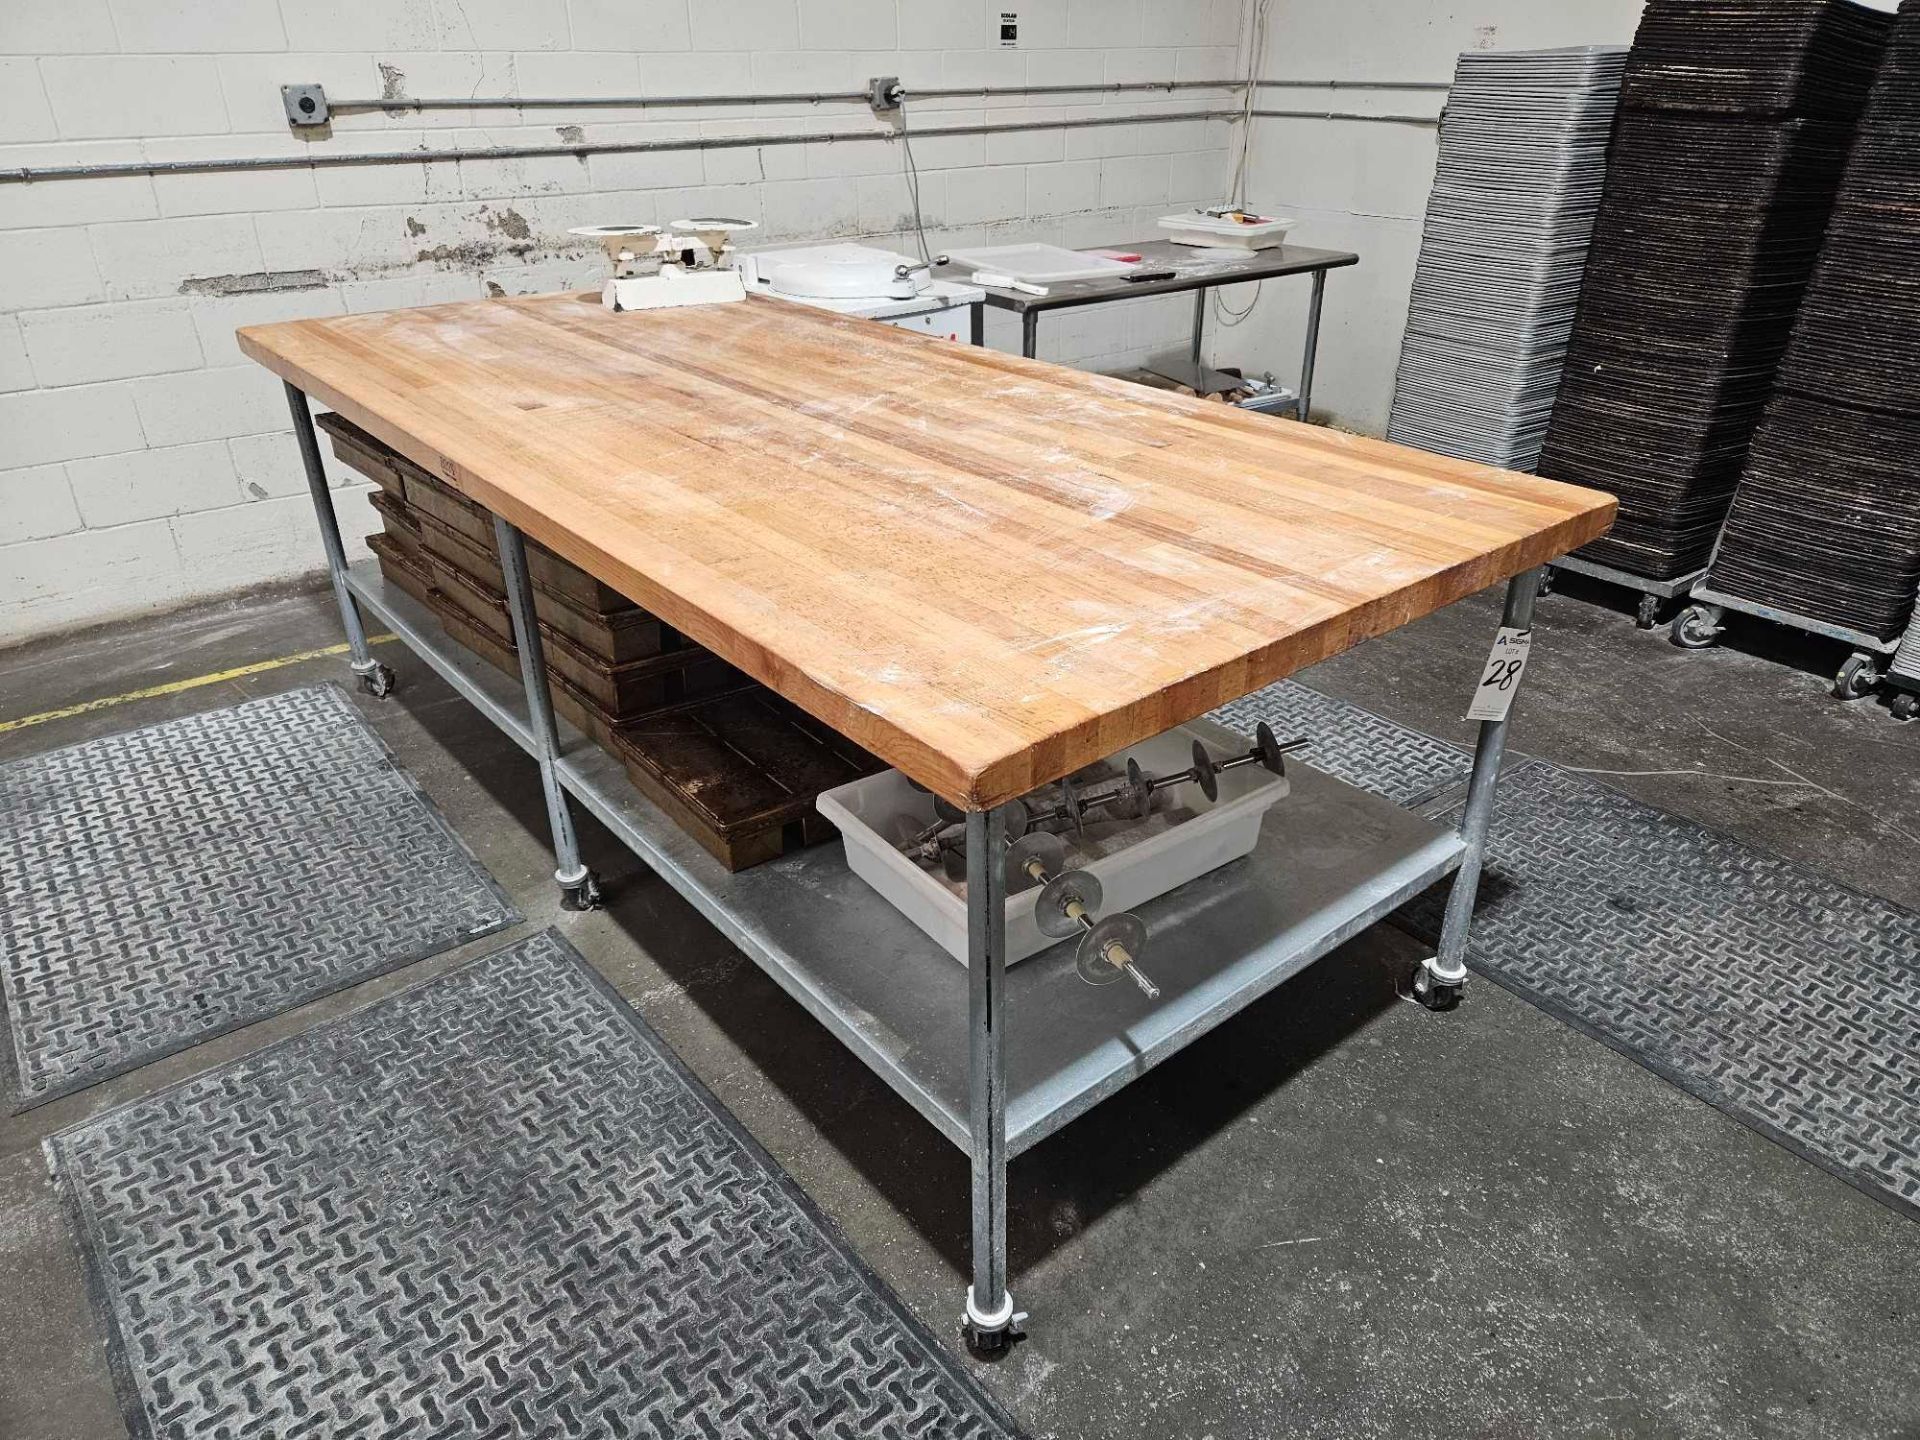 Butcher Block top with stainless steel shelf and casters